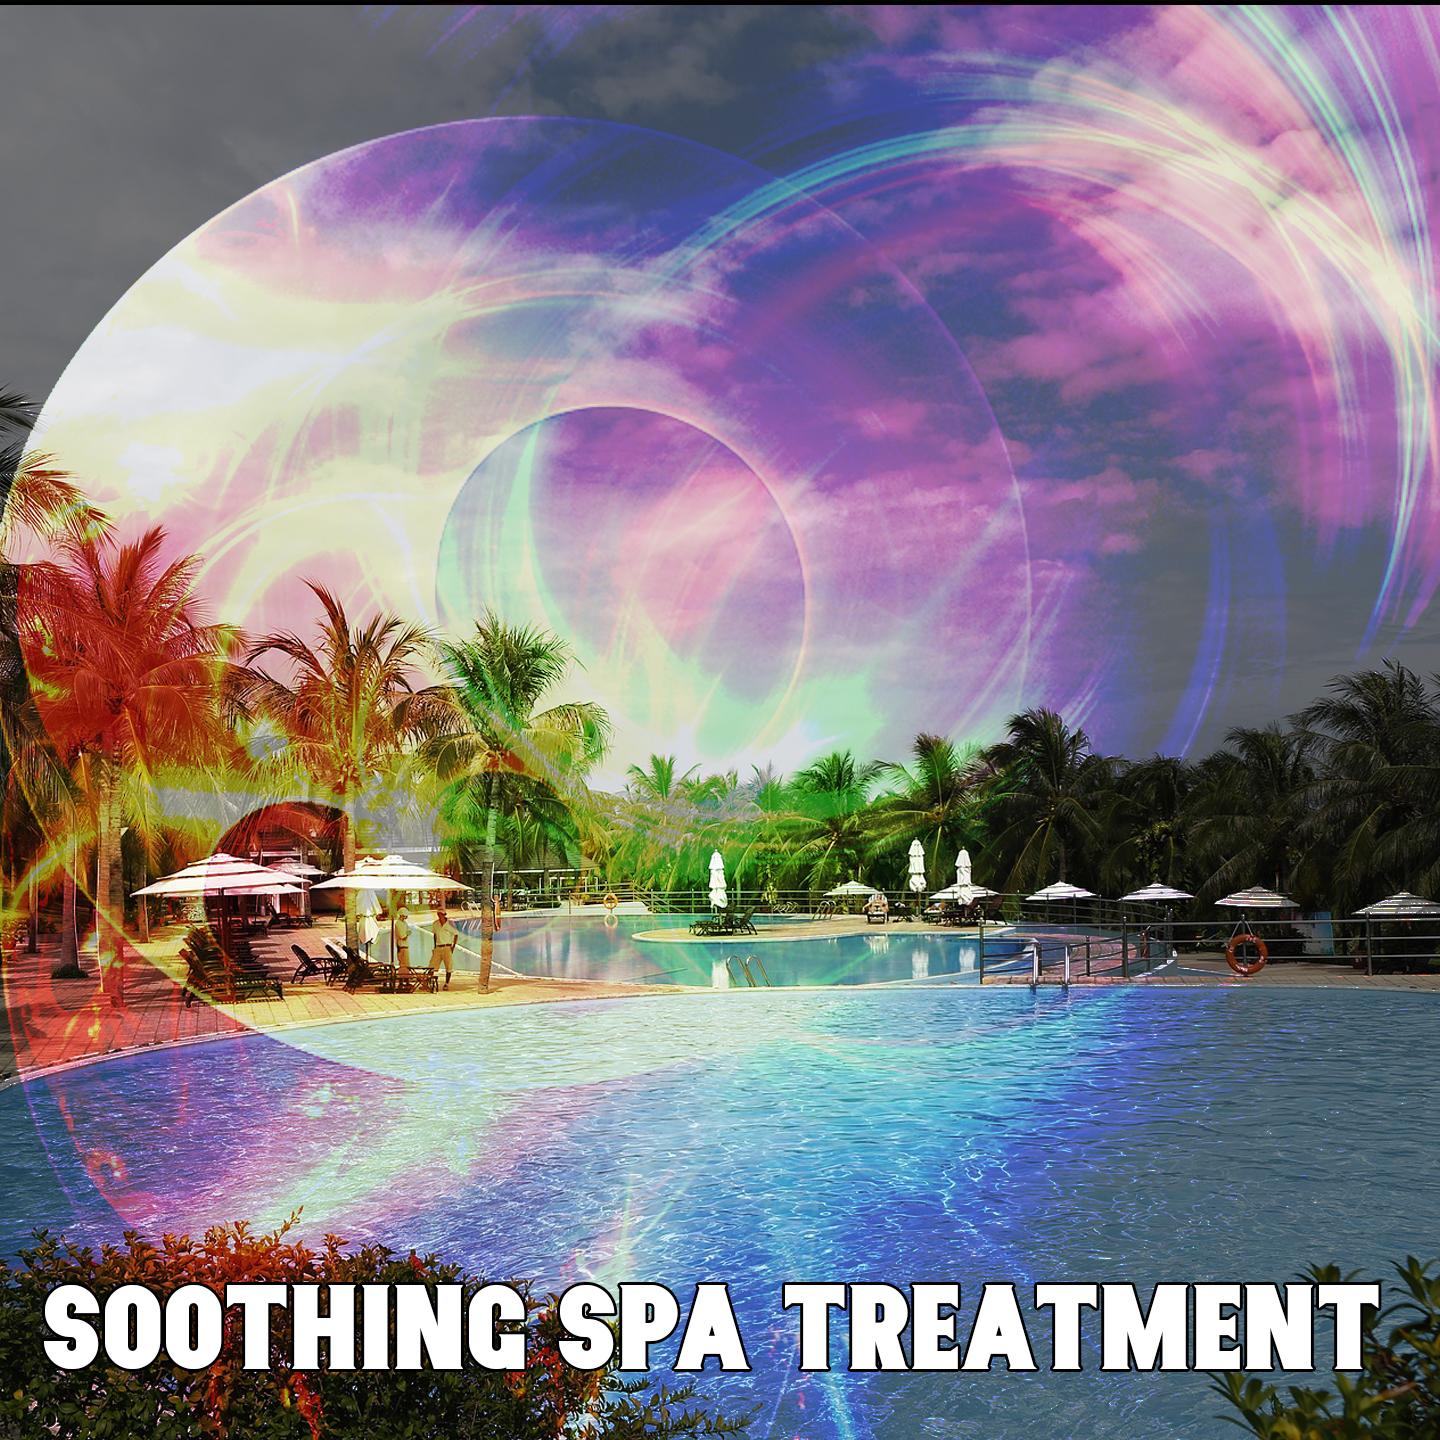 Soothing Spa Treatment